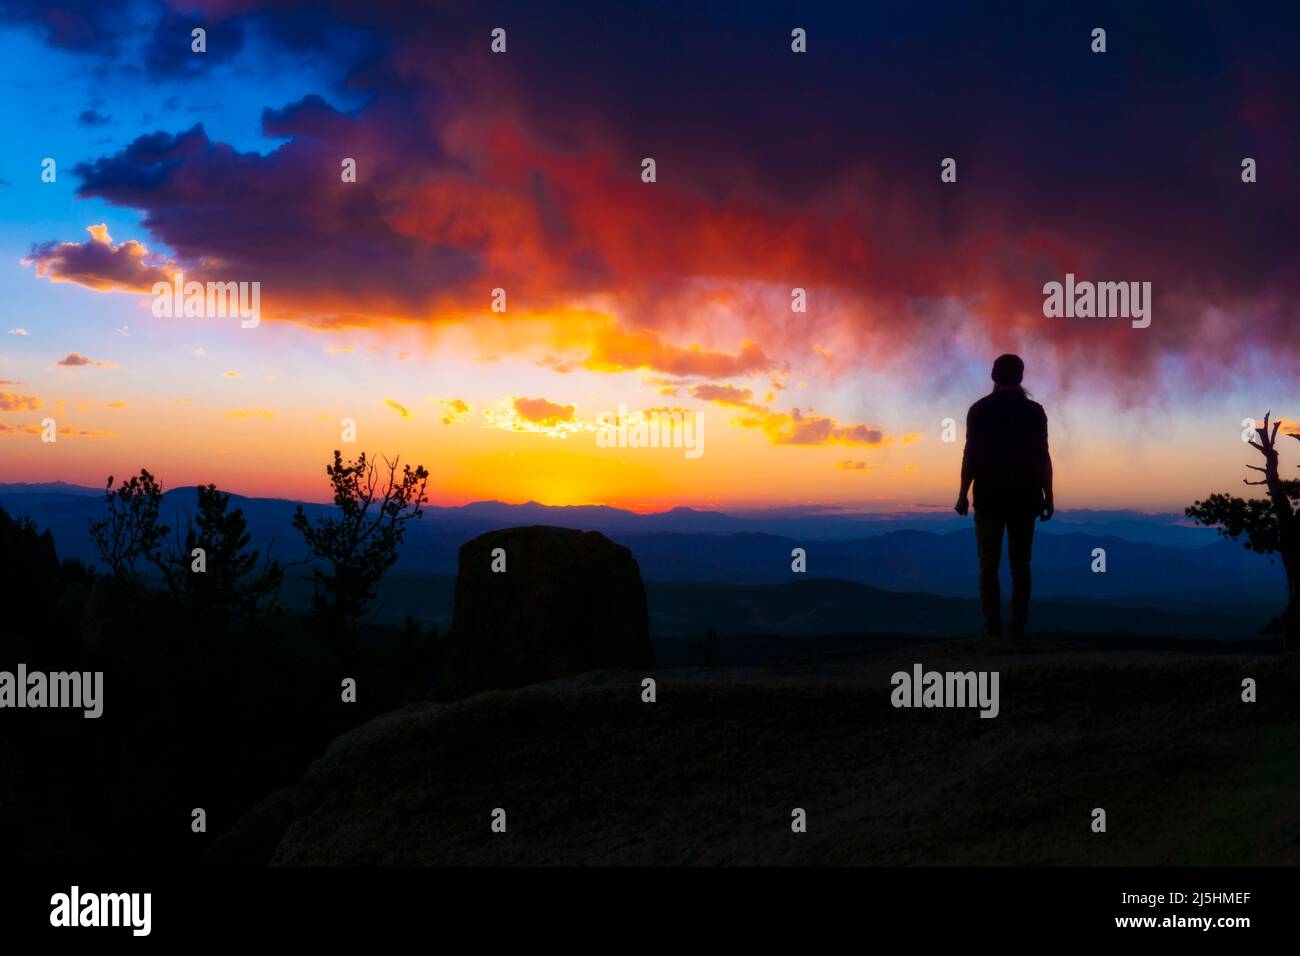 Beautiful Serene Calm Person At Colorful Sunset From Landscape View Stock Photo